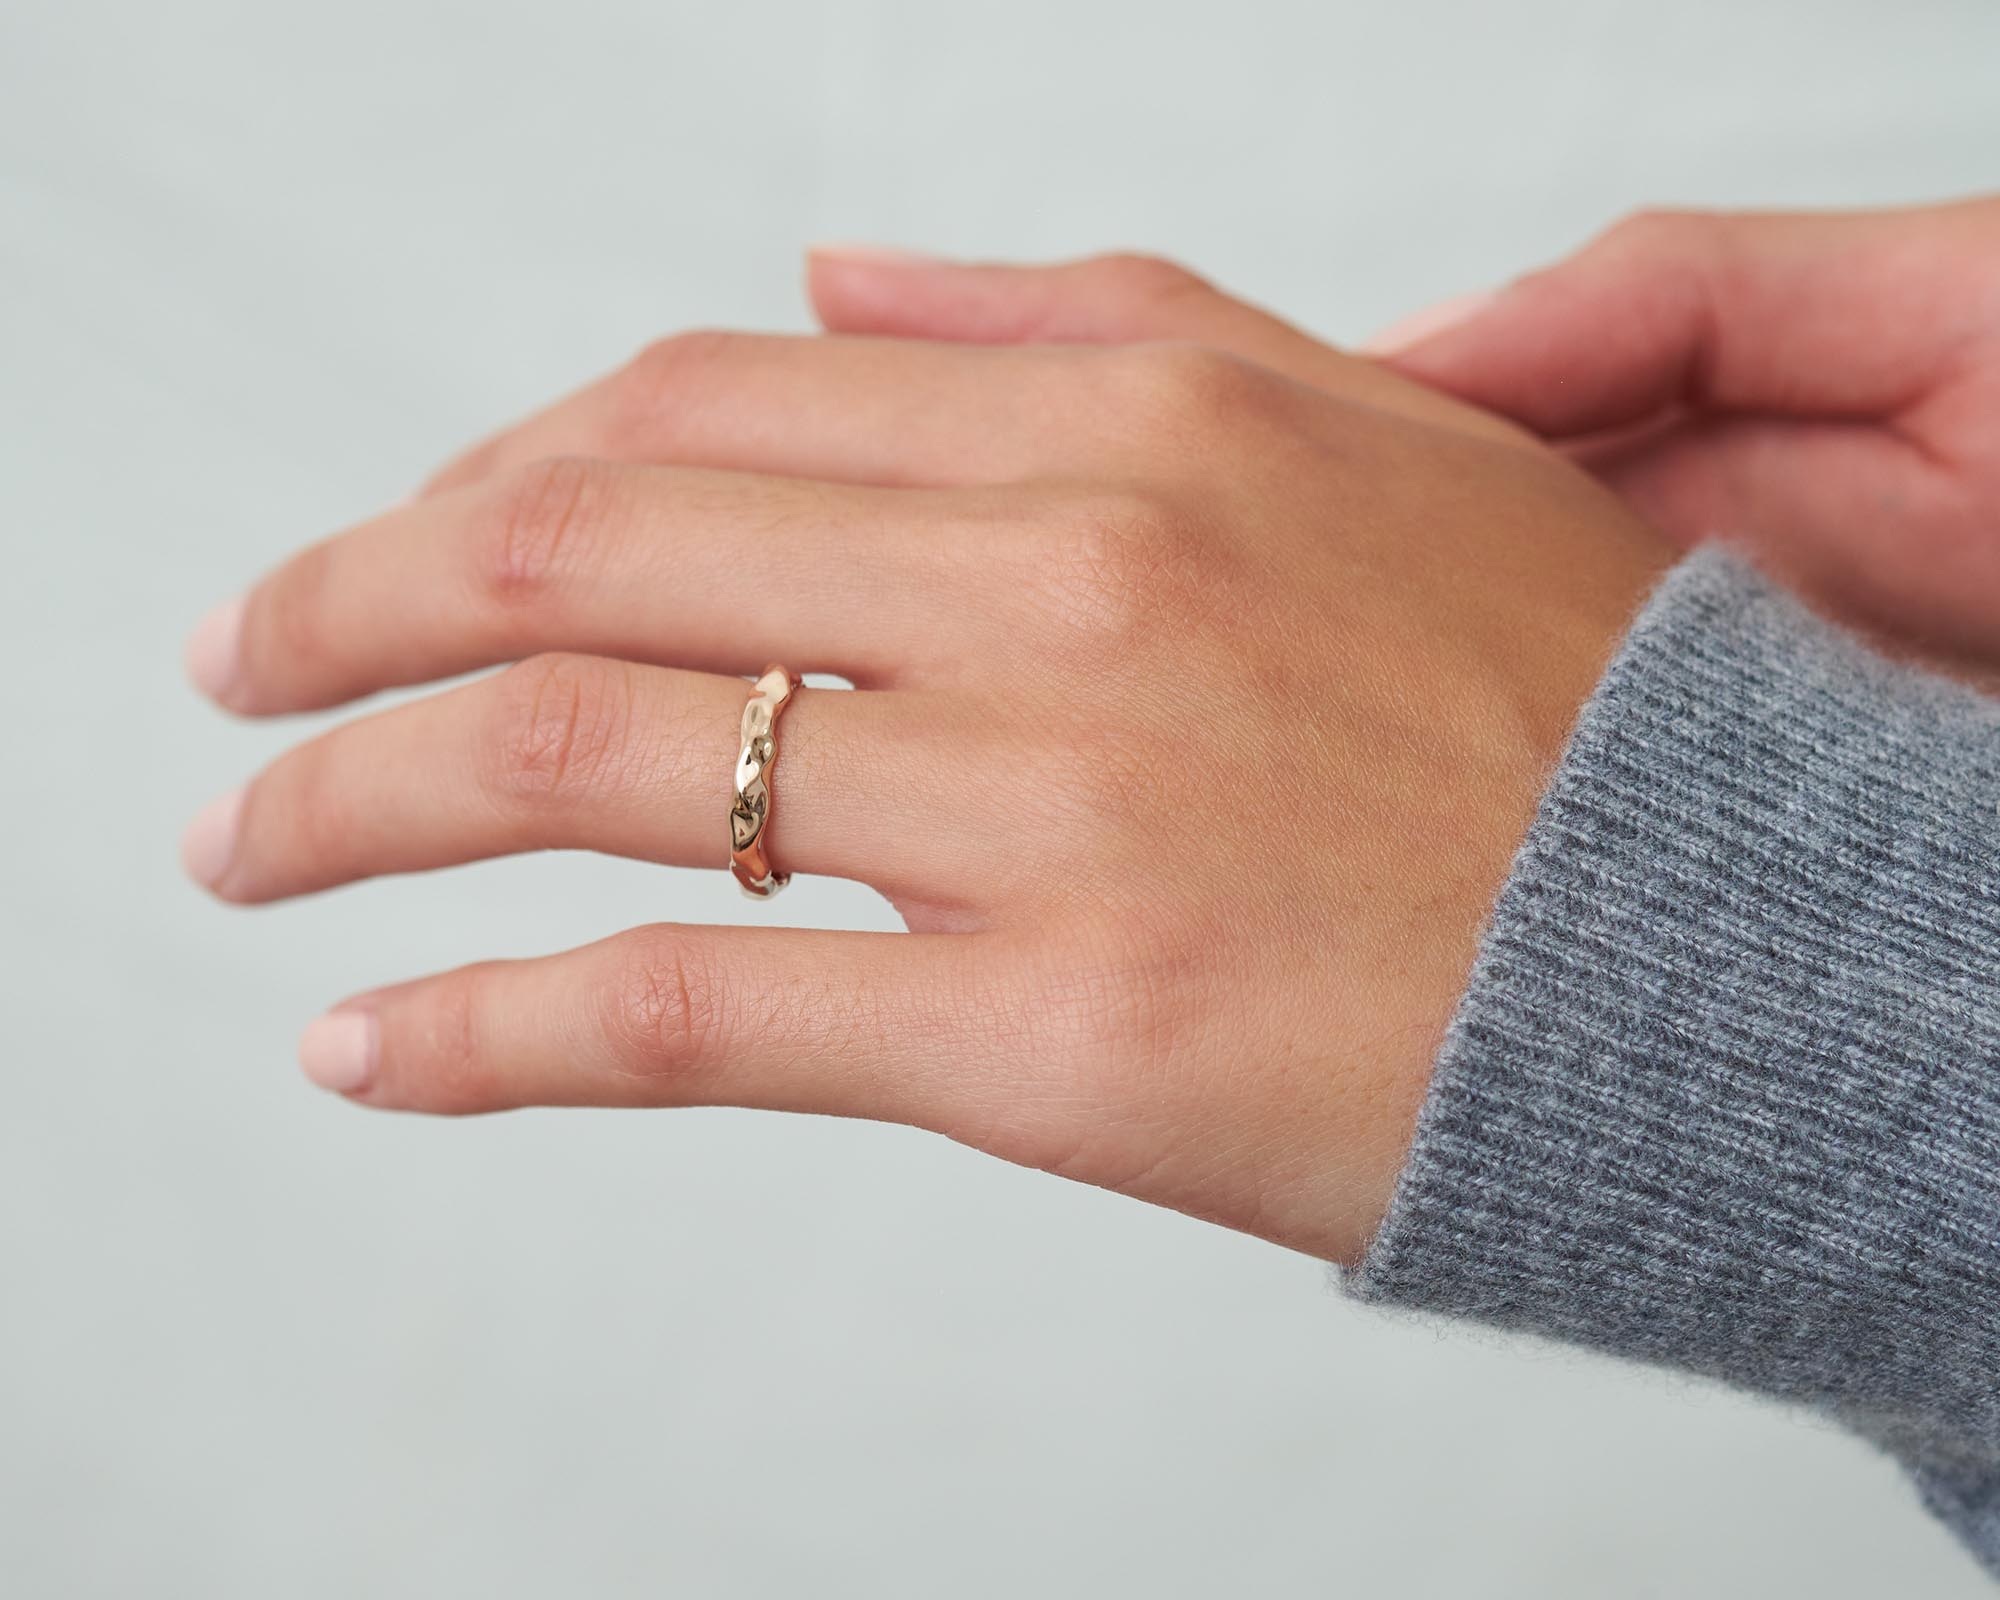 22k Gold Wedding Ring, Hammered Gold Ring, Organic Gold Ring, Boho Wedding  Ring for Women, Simple Band, Geometric Ring Antique Style Ring - Etsy |  Hammered gold ring, Organic gold ring, Gold rings